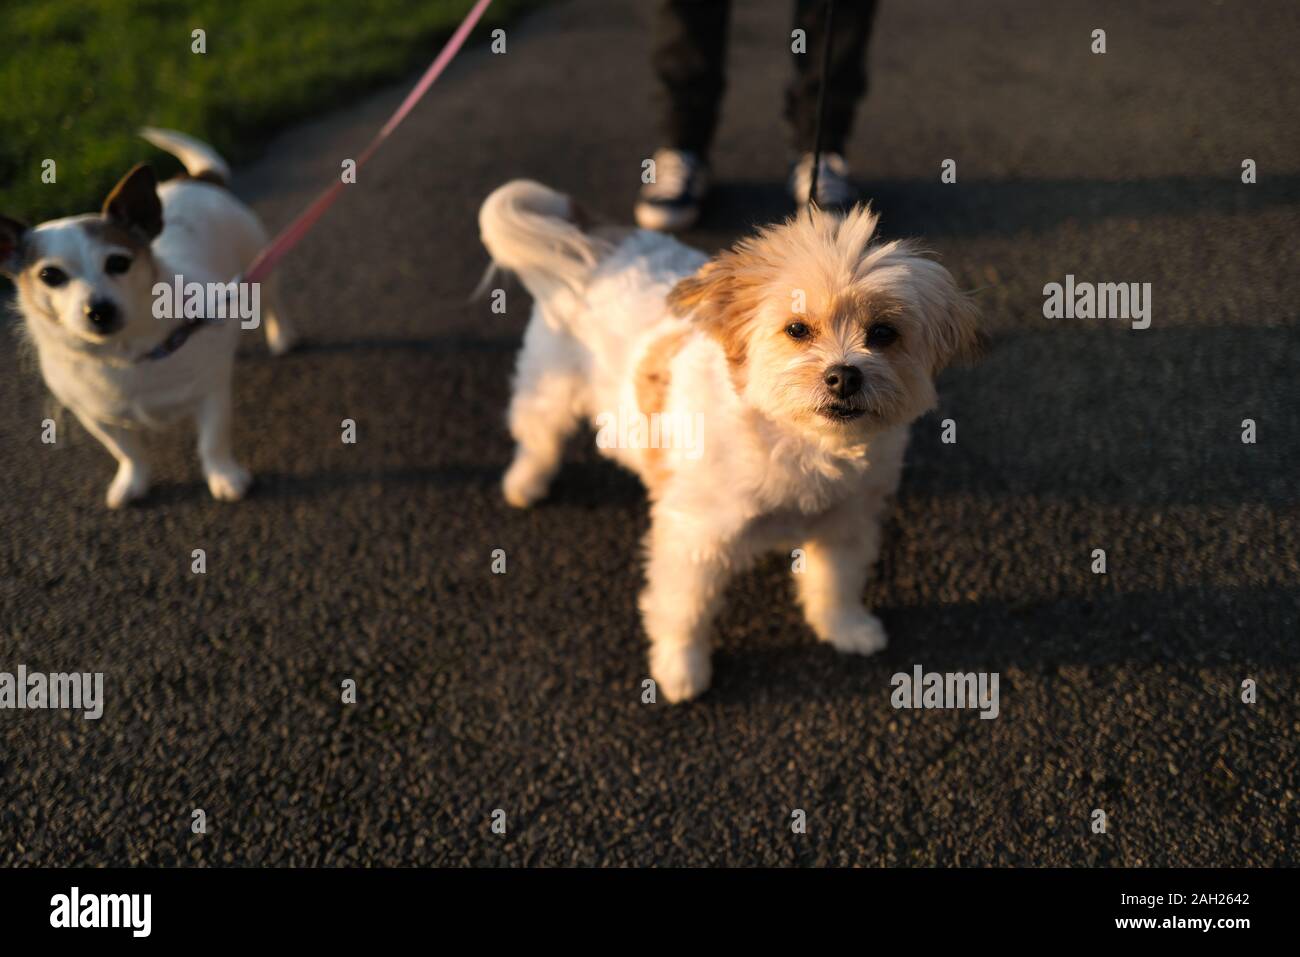 Adorable Maltese tan and white mix breed dog and an older Jack Russell terrier out for a walk on leads. The legs of their owner can be seen. The setti Stock Photo